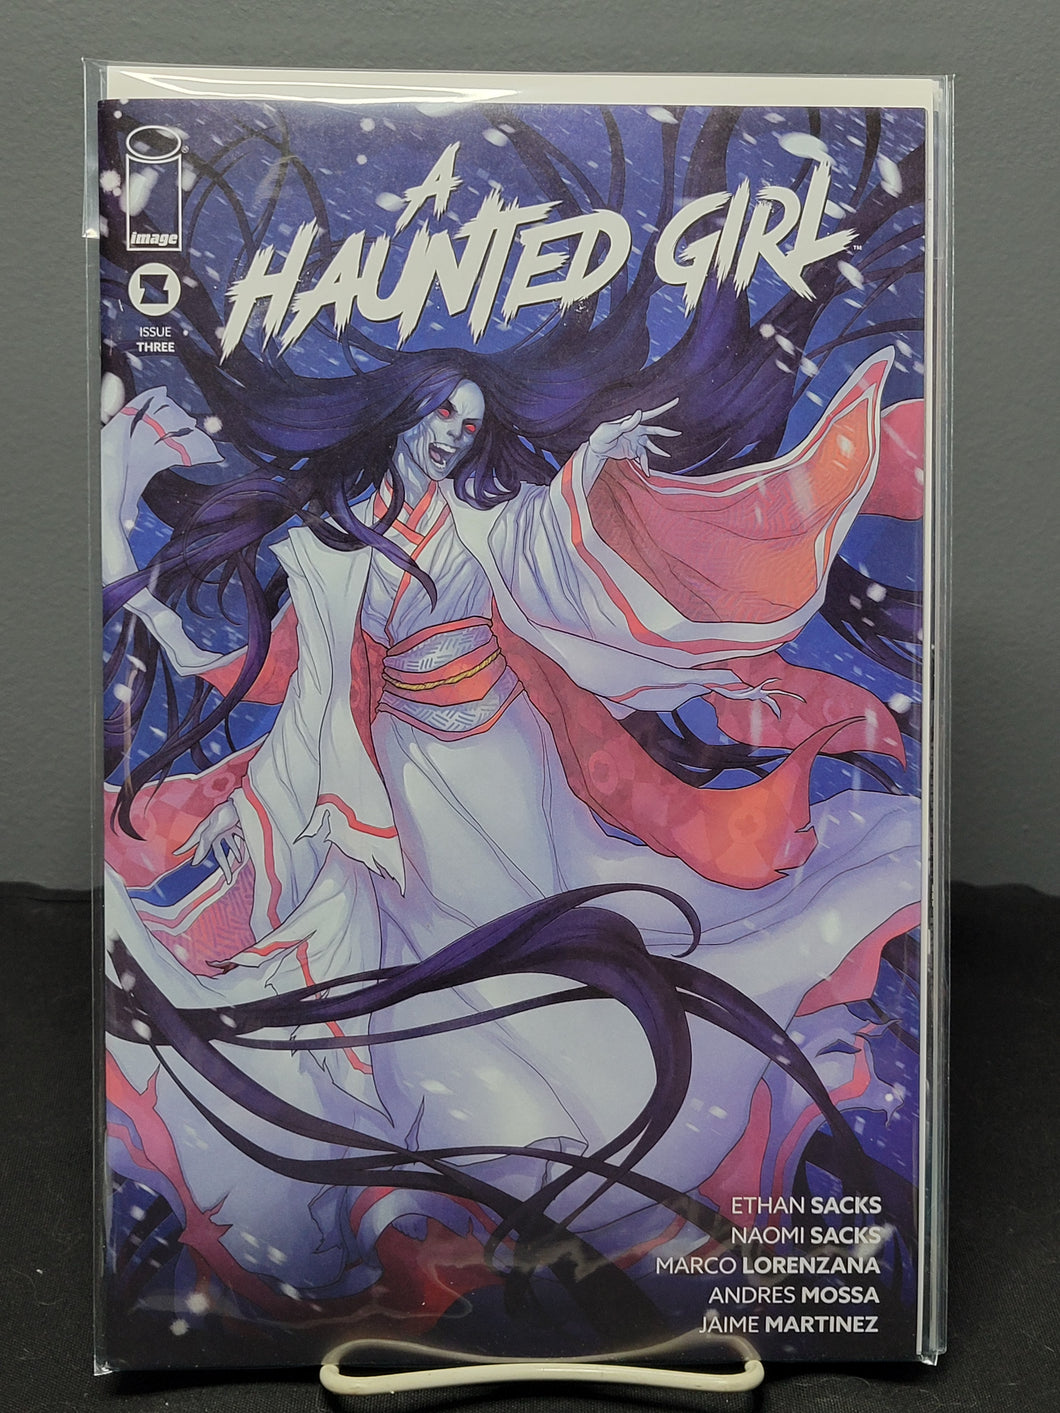 A Haunted Girl #3 Variant